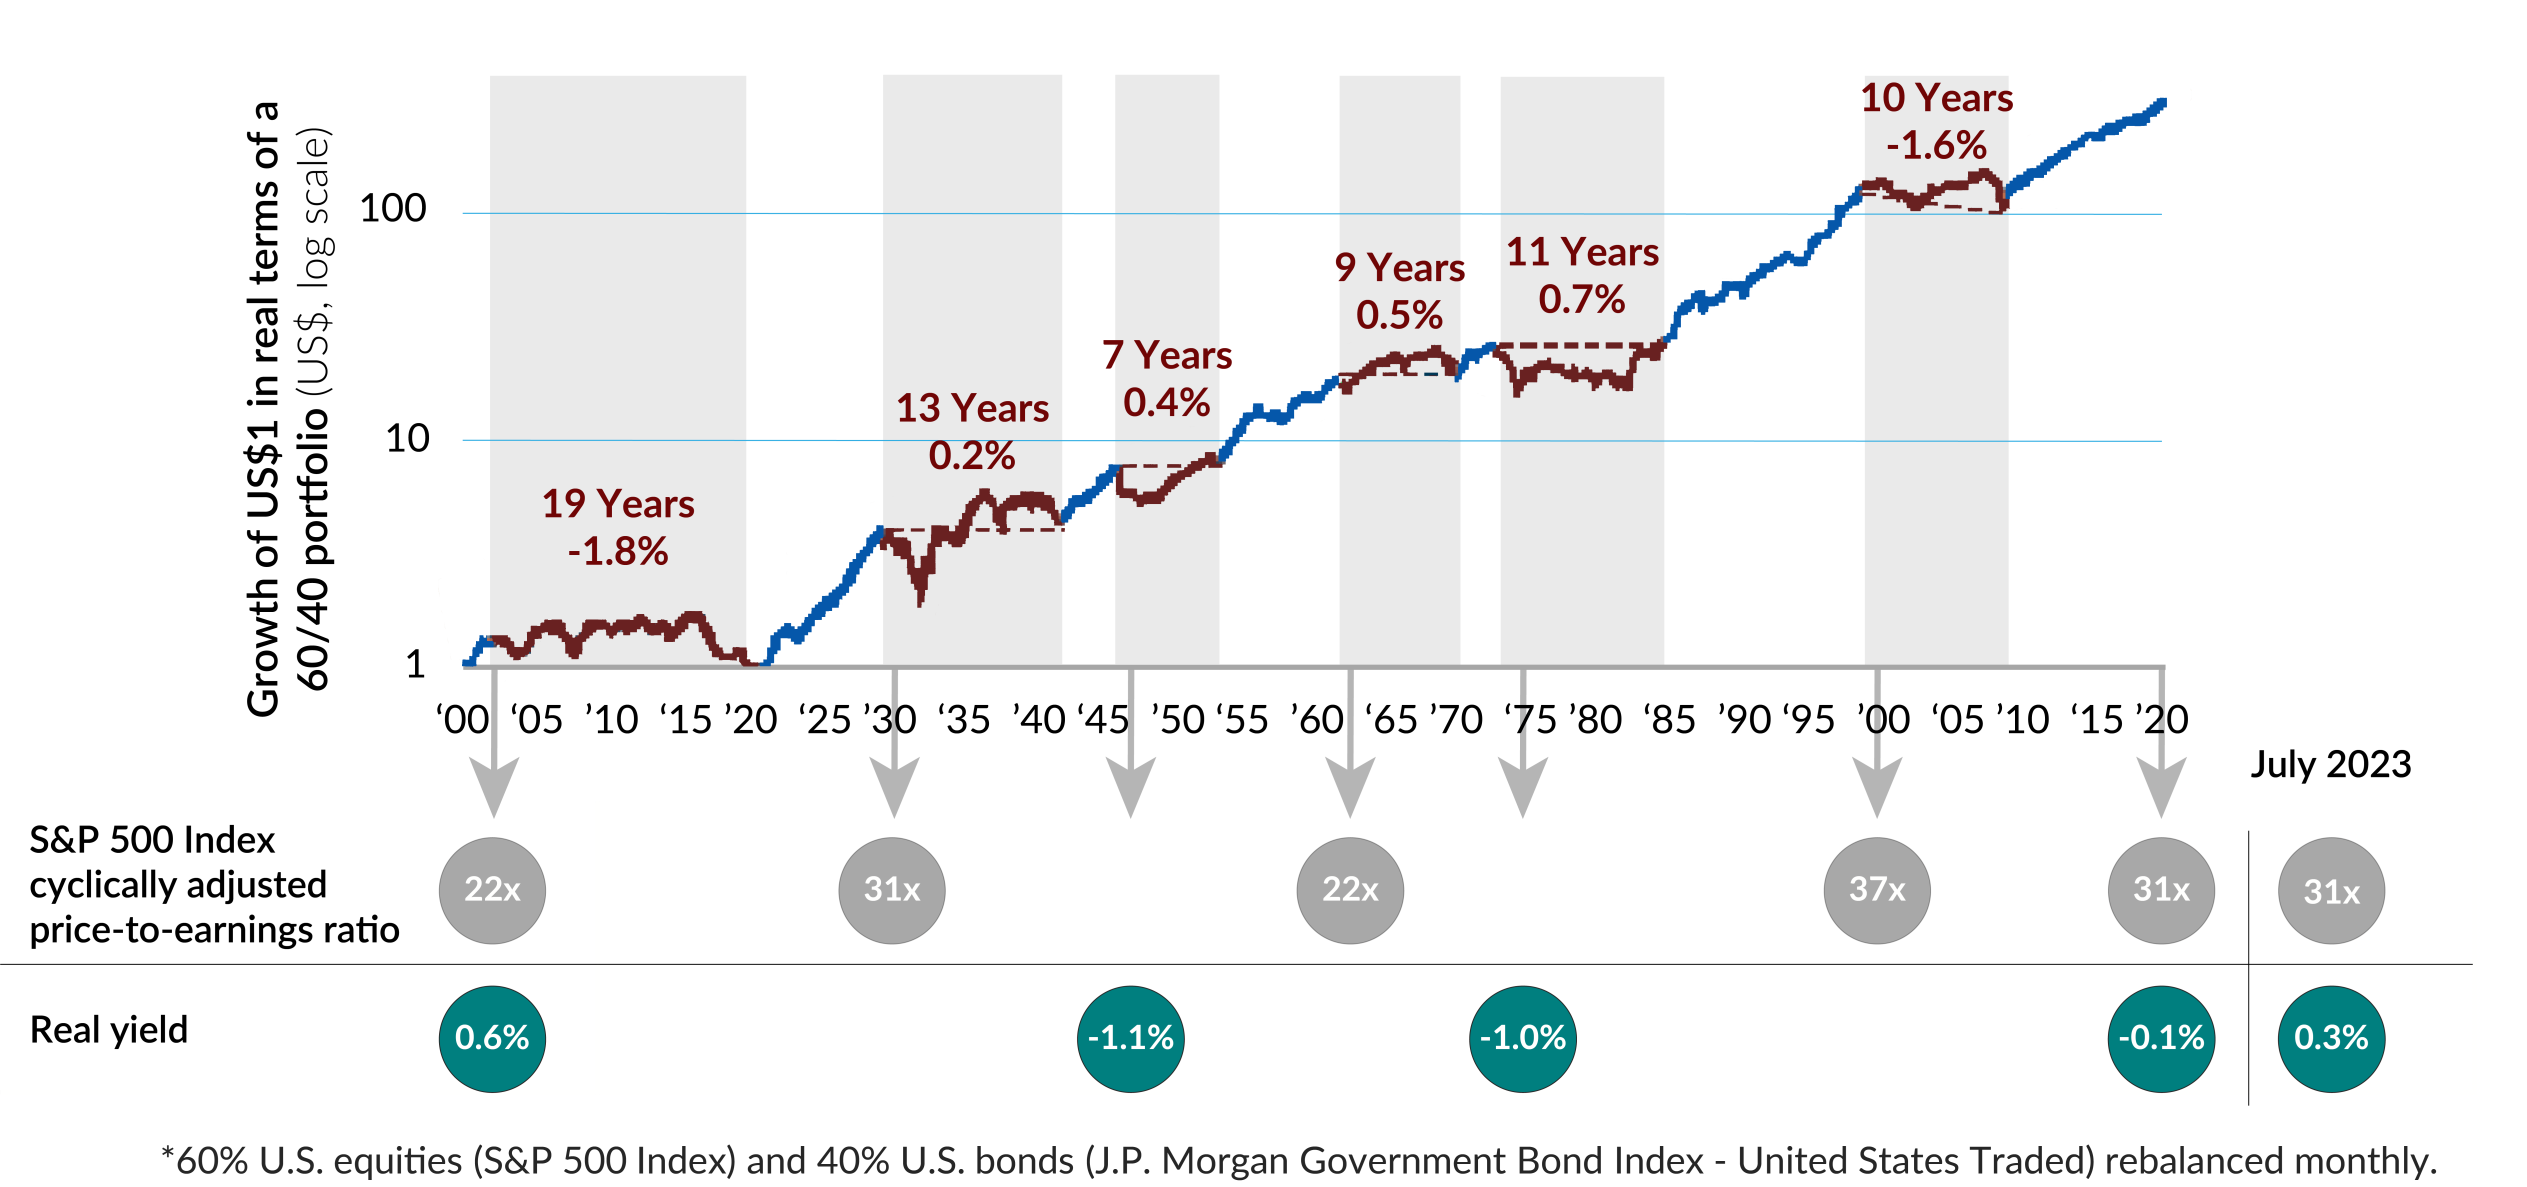 A chart highlighting the growth of $1 in a 60% equity/40% fixed income balanced portfolio from 1900 to September 2020, along with S&P 500 Index cyclically adjusted price-to-earnings ratios and the real yield at the time. Only September 2020 had notably high price-to-earnings ratio (31x) and real yield (-0.1%). Looking at July 2023, the price-to-earnings ratio was 31x while real yield was 0.3%.